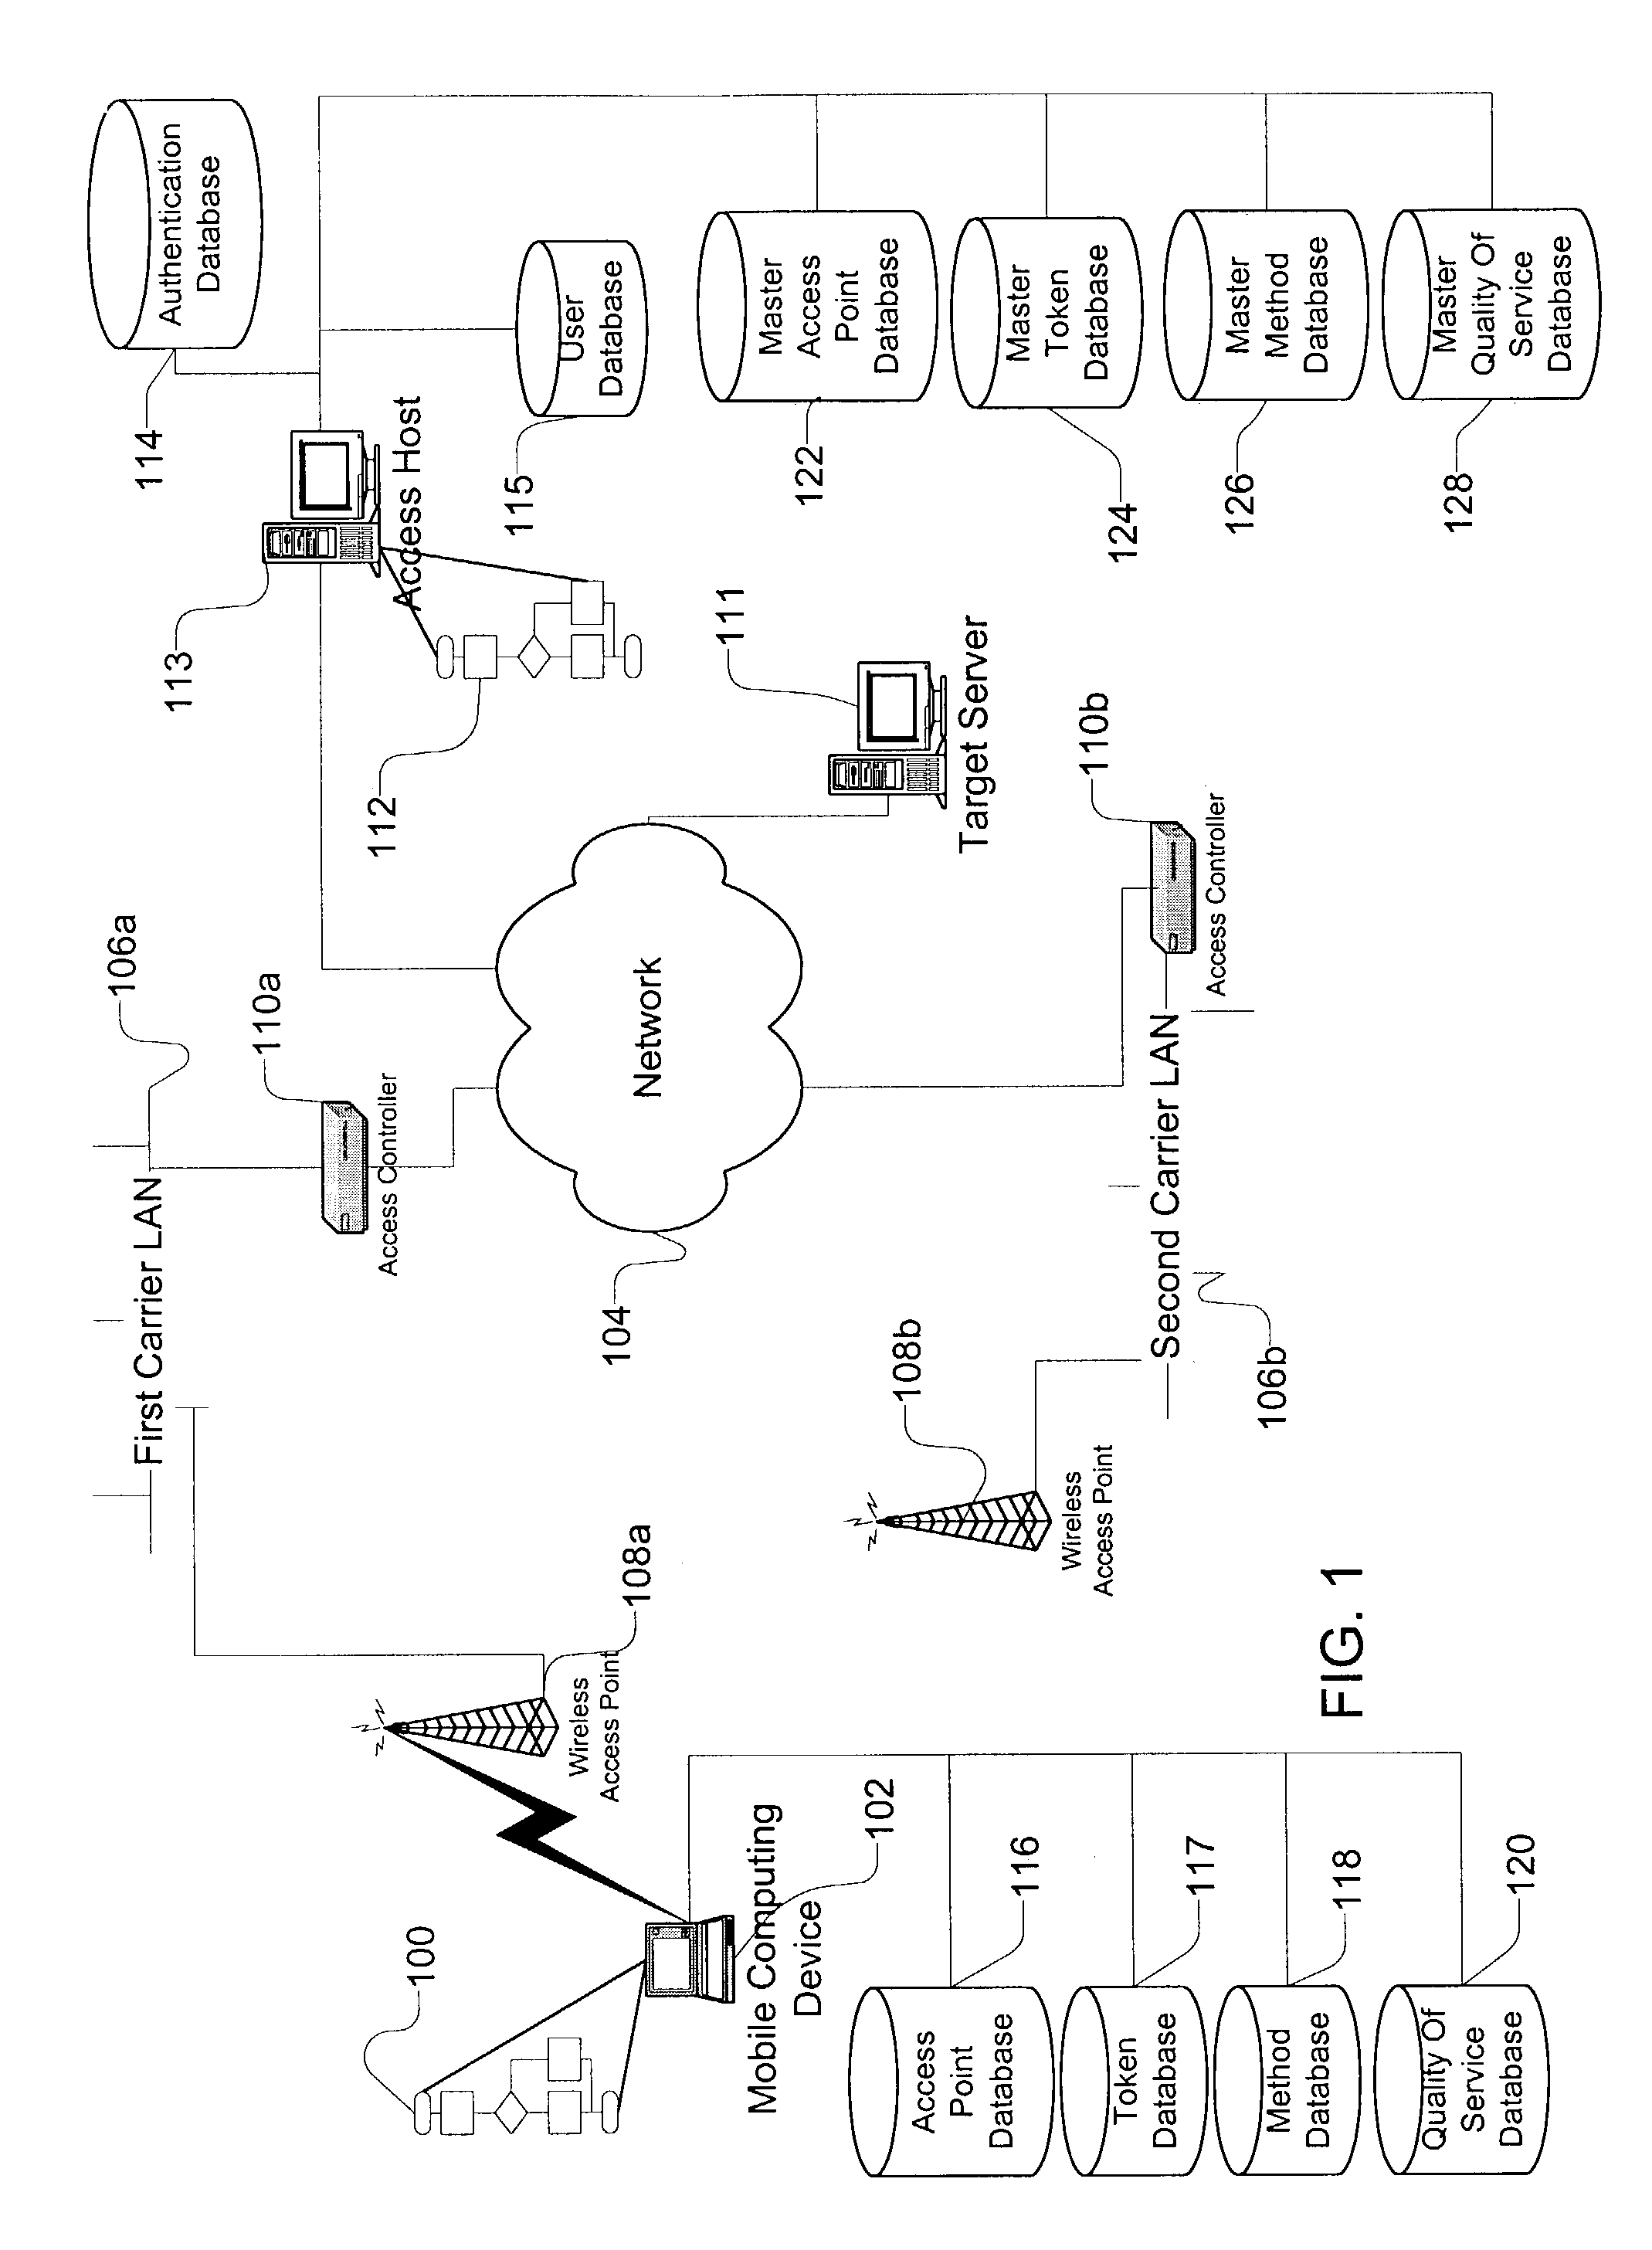 Method and apparatus for accessing networks by a mobile device